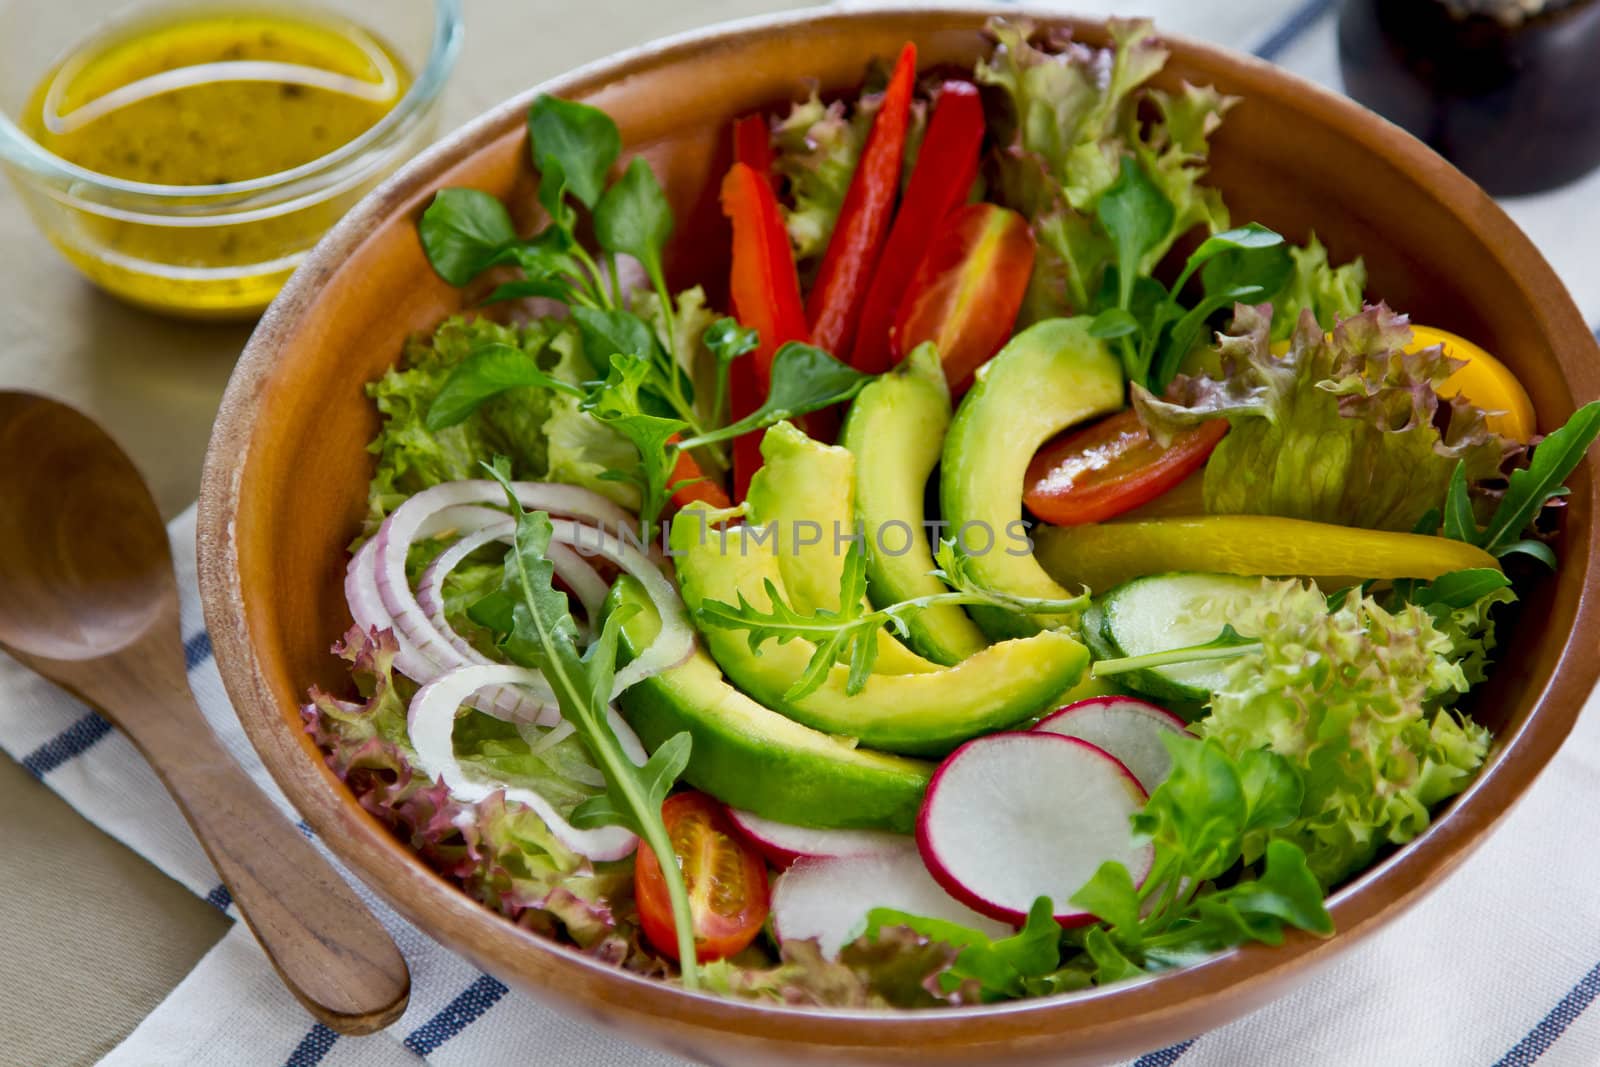 Avocado with pepper,radish and lettuce salad by vinaigrette